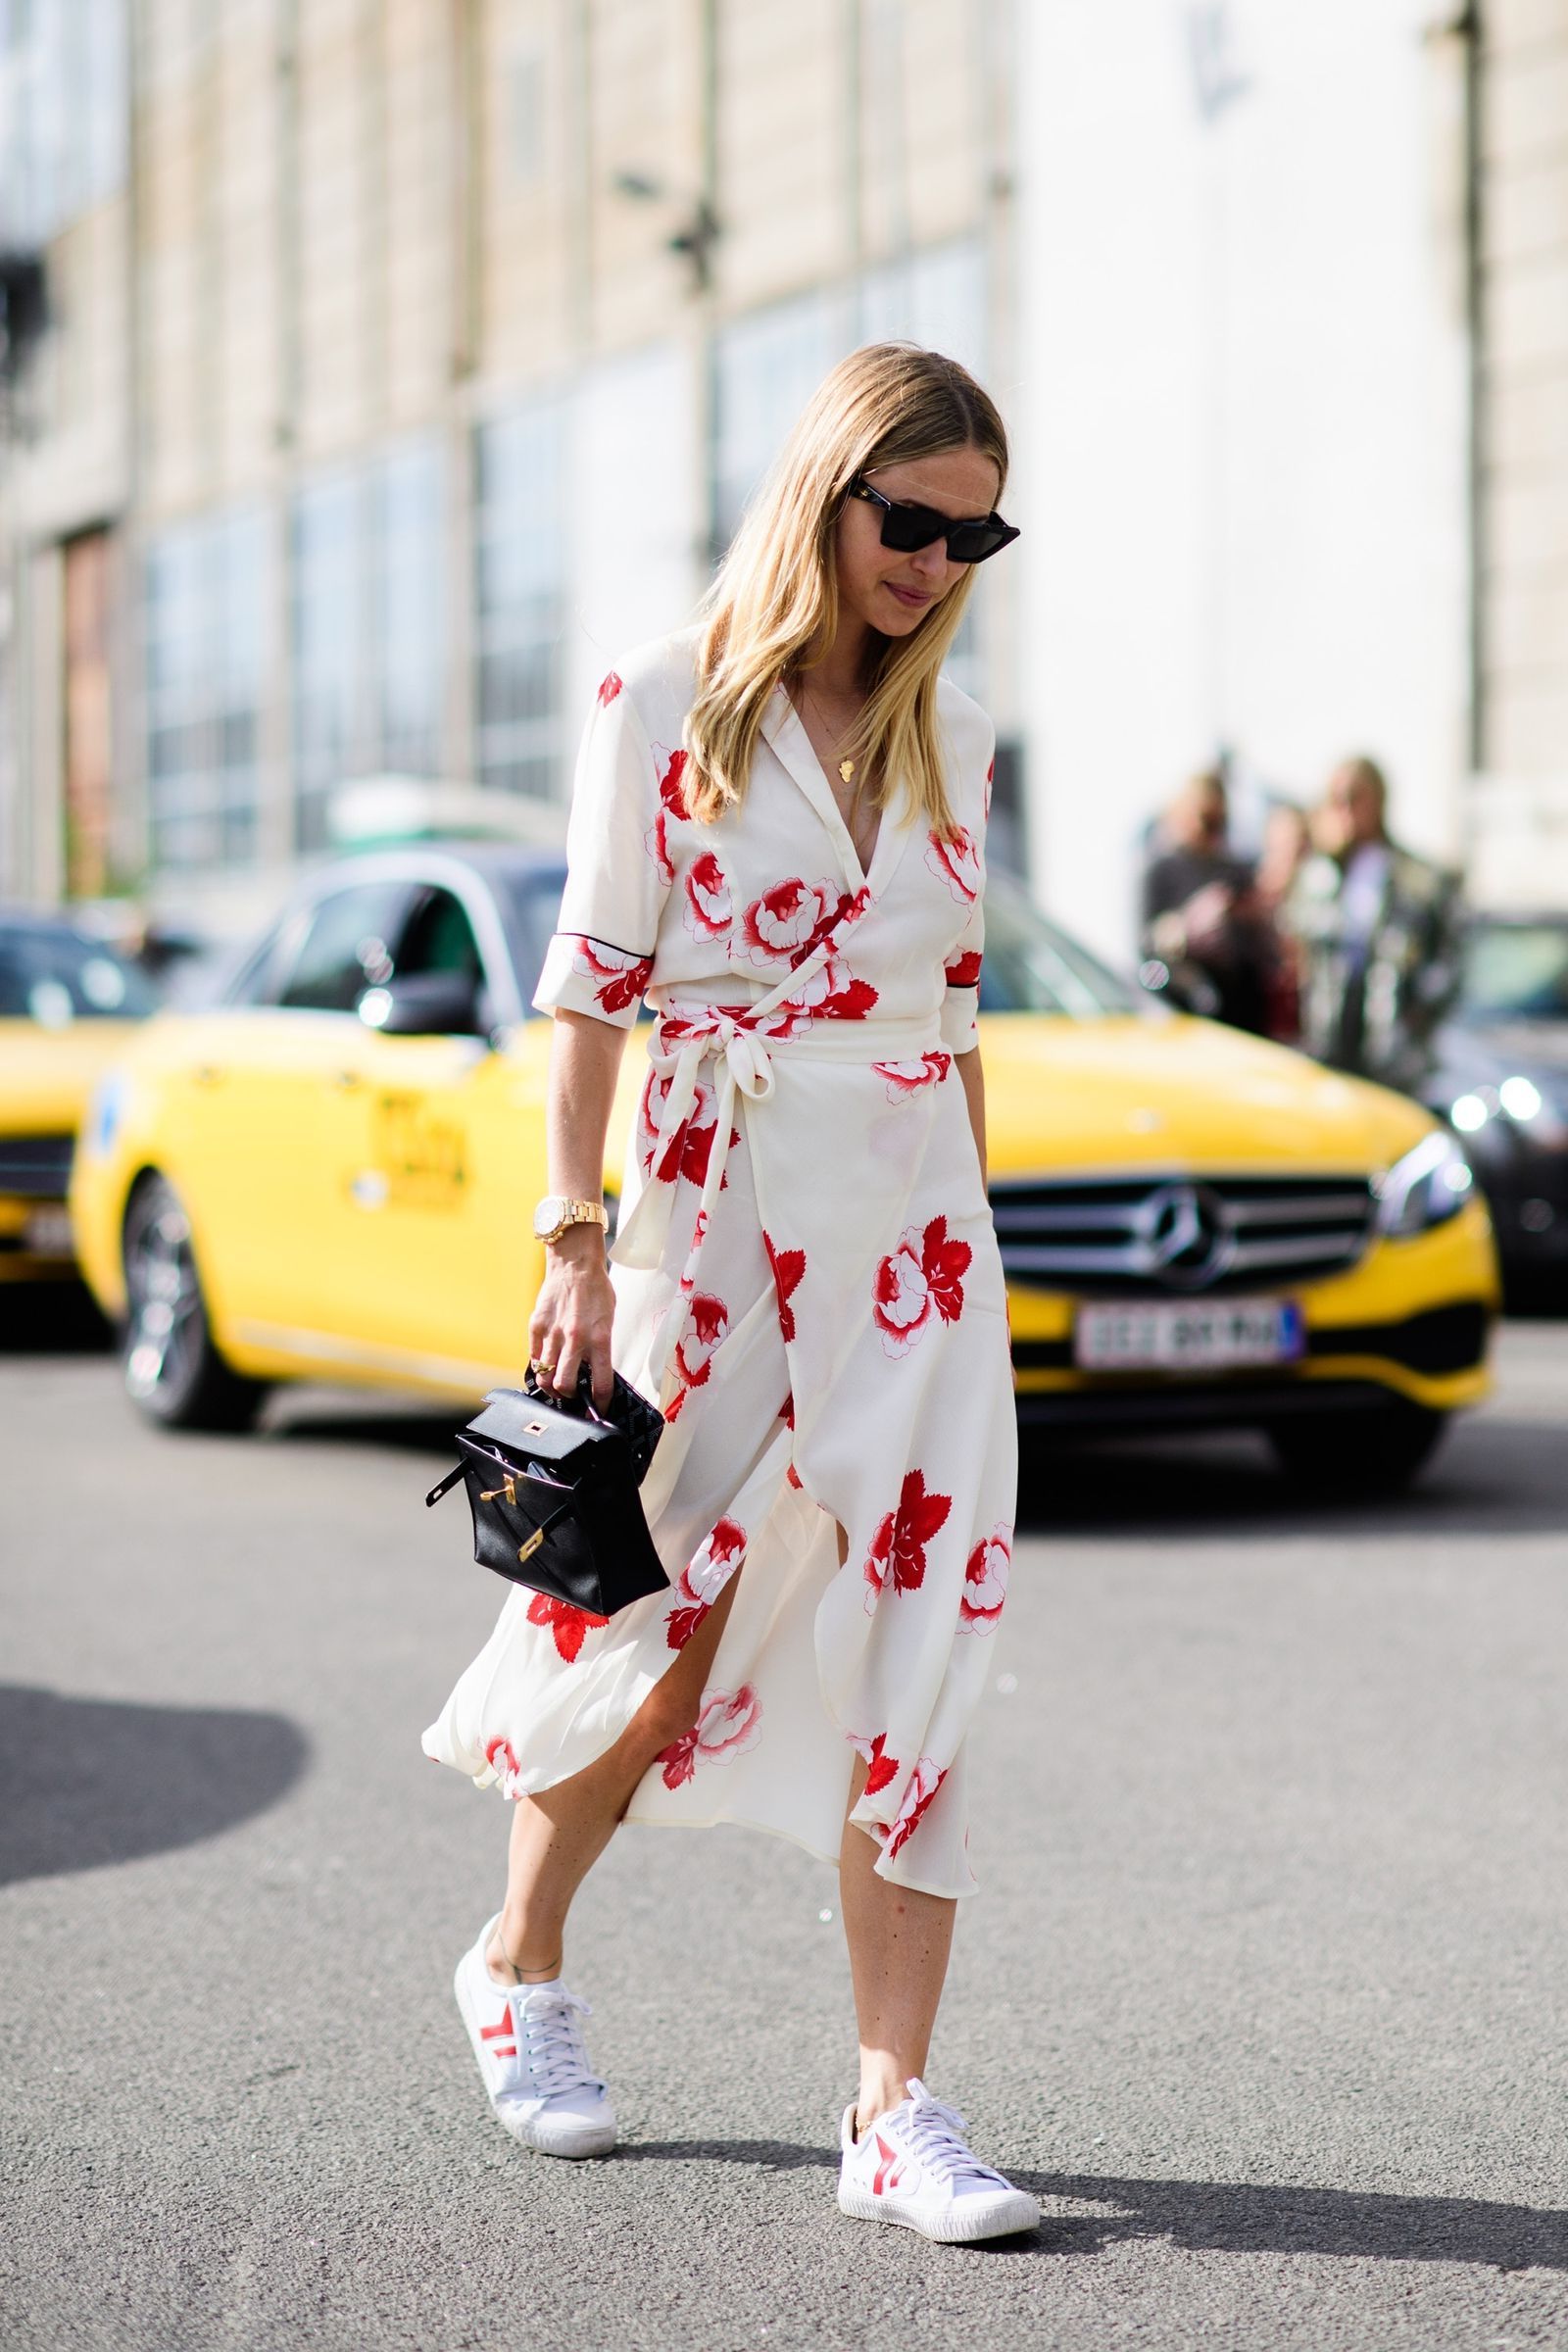 Are Floral Print Dresses in Style This Summer 2022